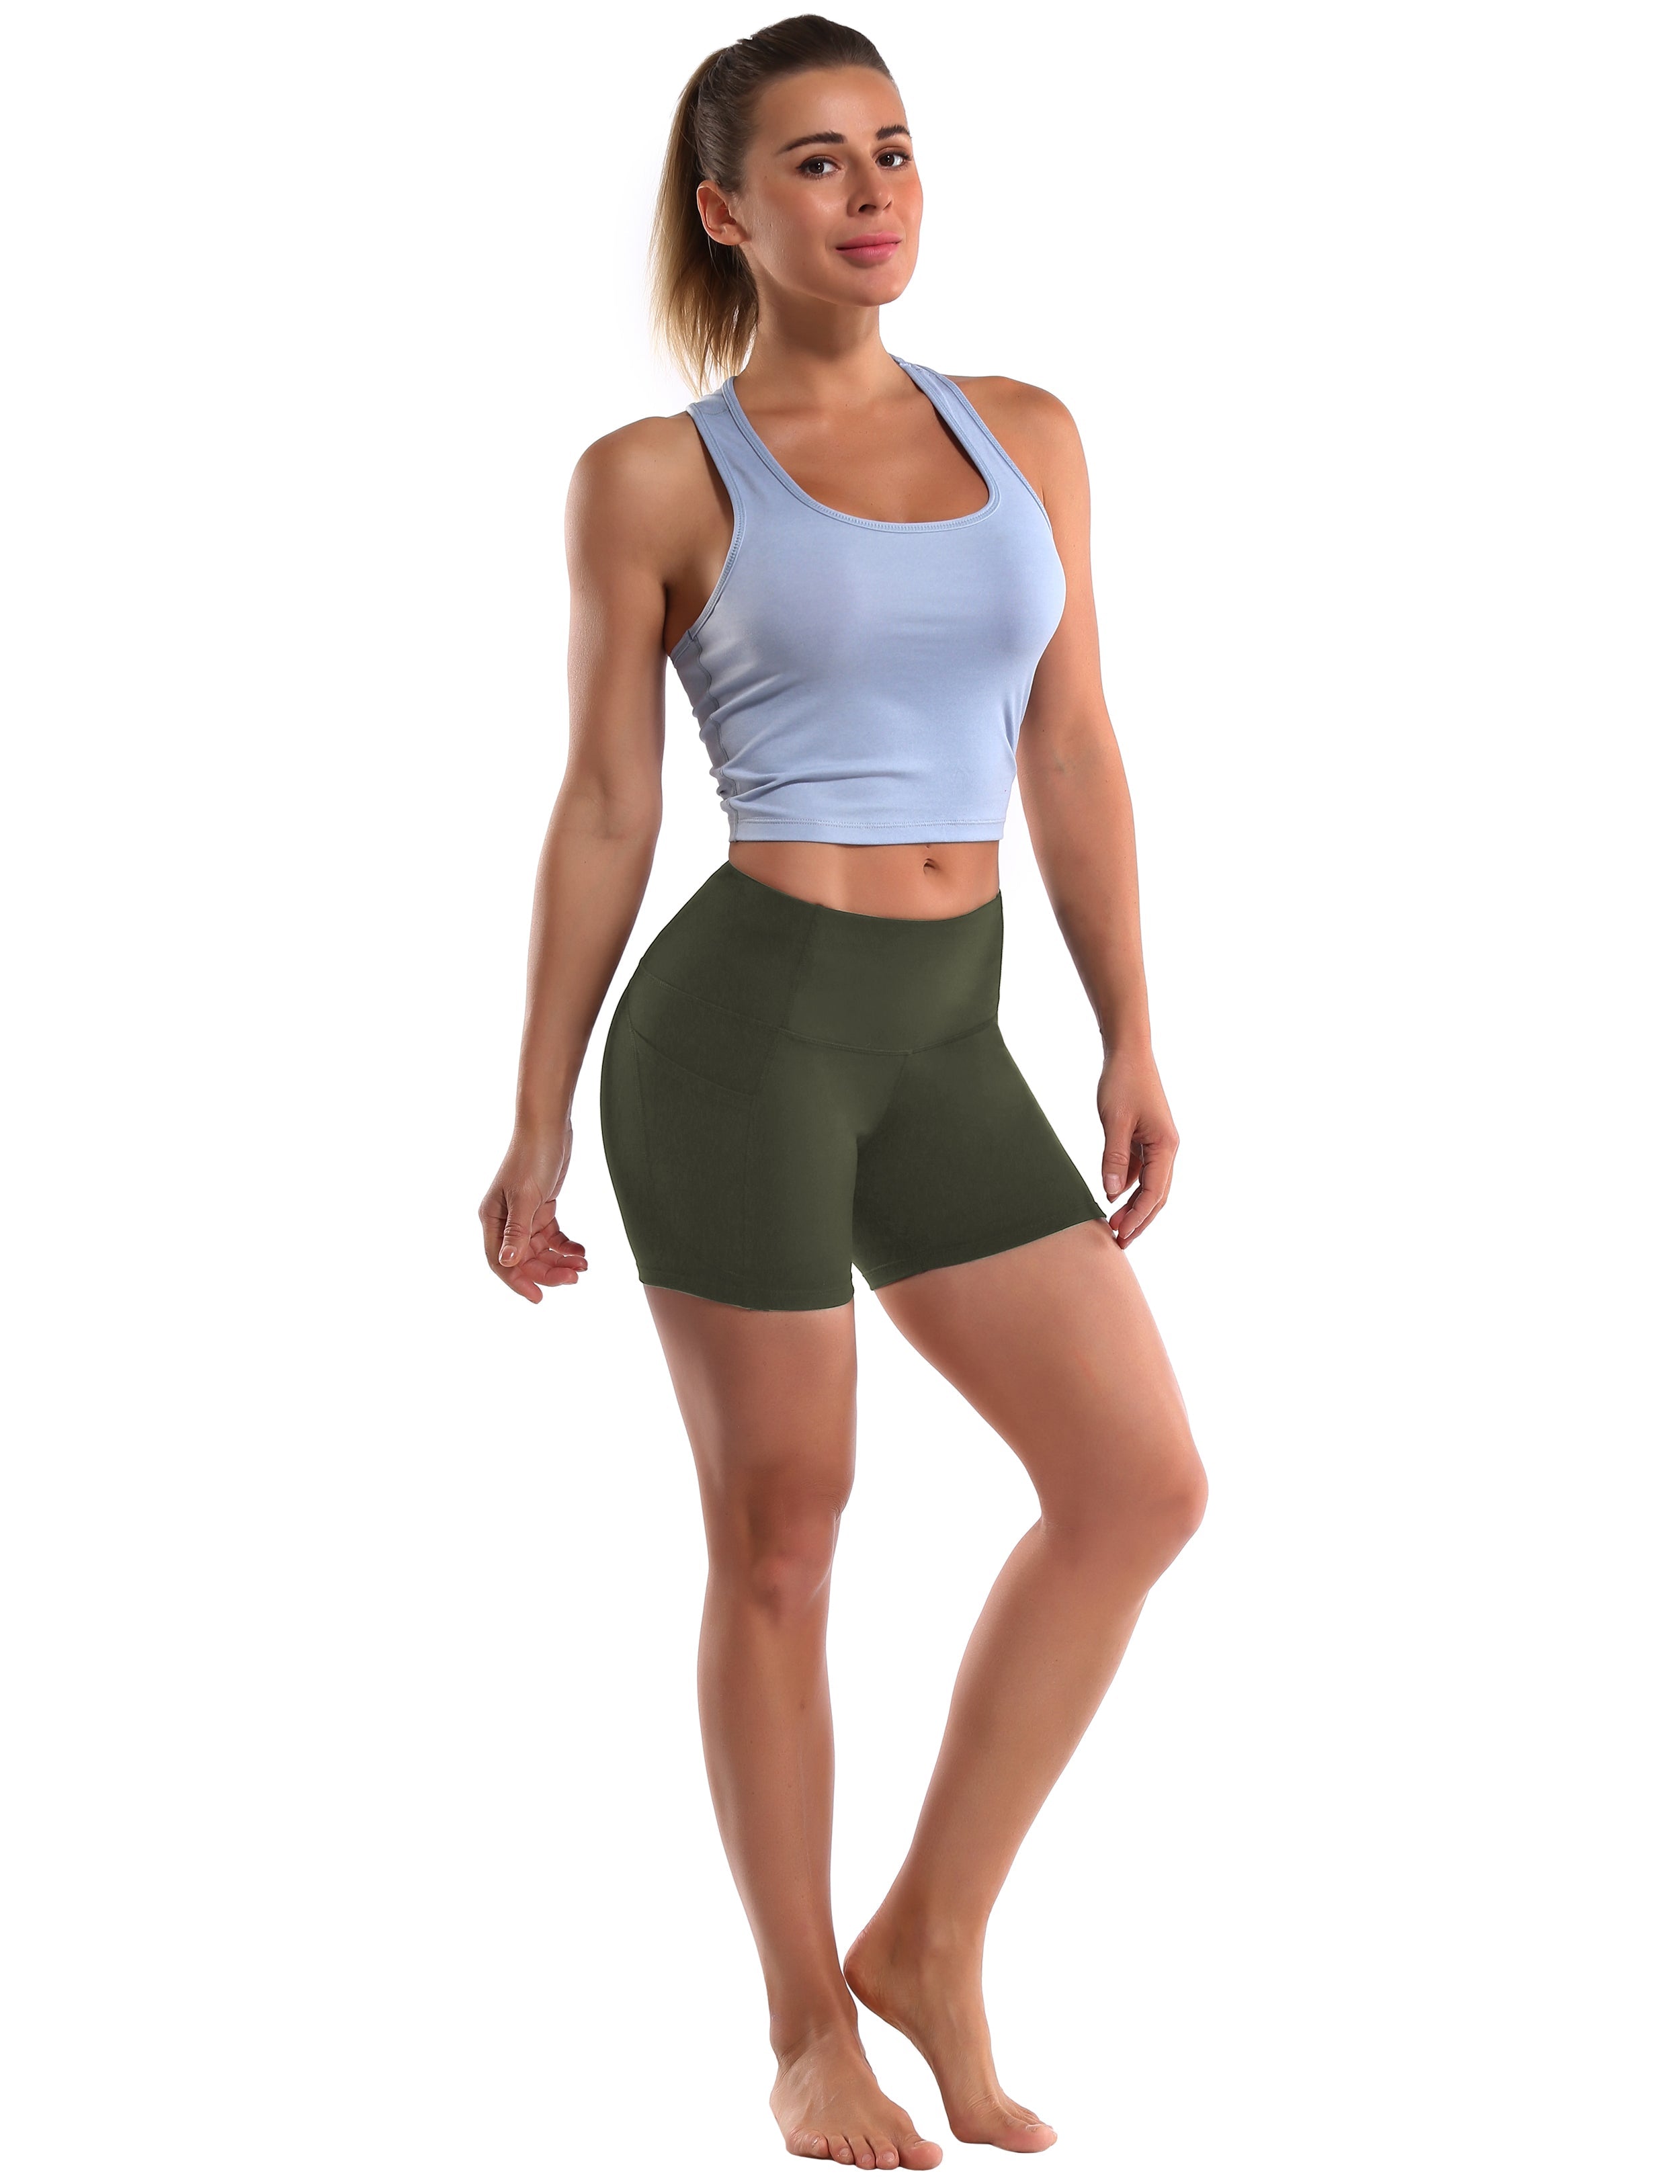 High Waist Side Pockets Biking Shorts green Softest-ever fabric High elasticity 4-way stretch Fabric doesn't attract lint easily No see-through Moisture-wicking Machine wash 88% Nylon, 12% Spandex